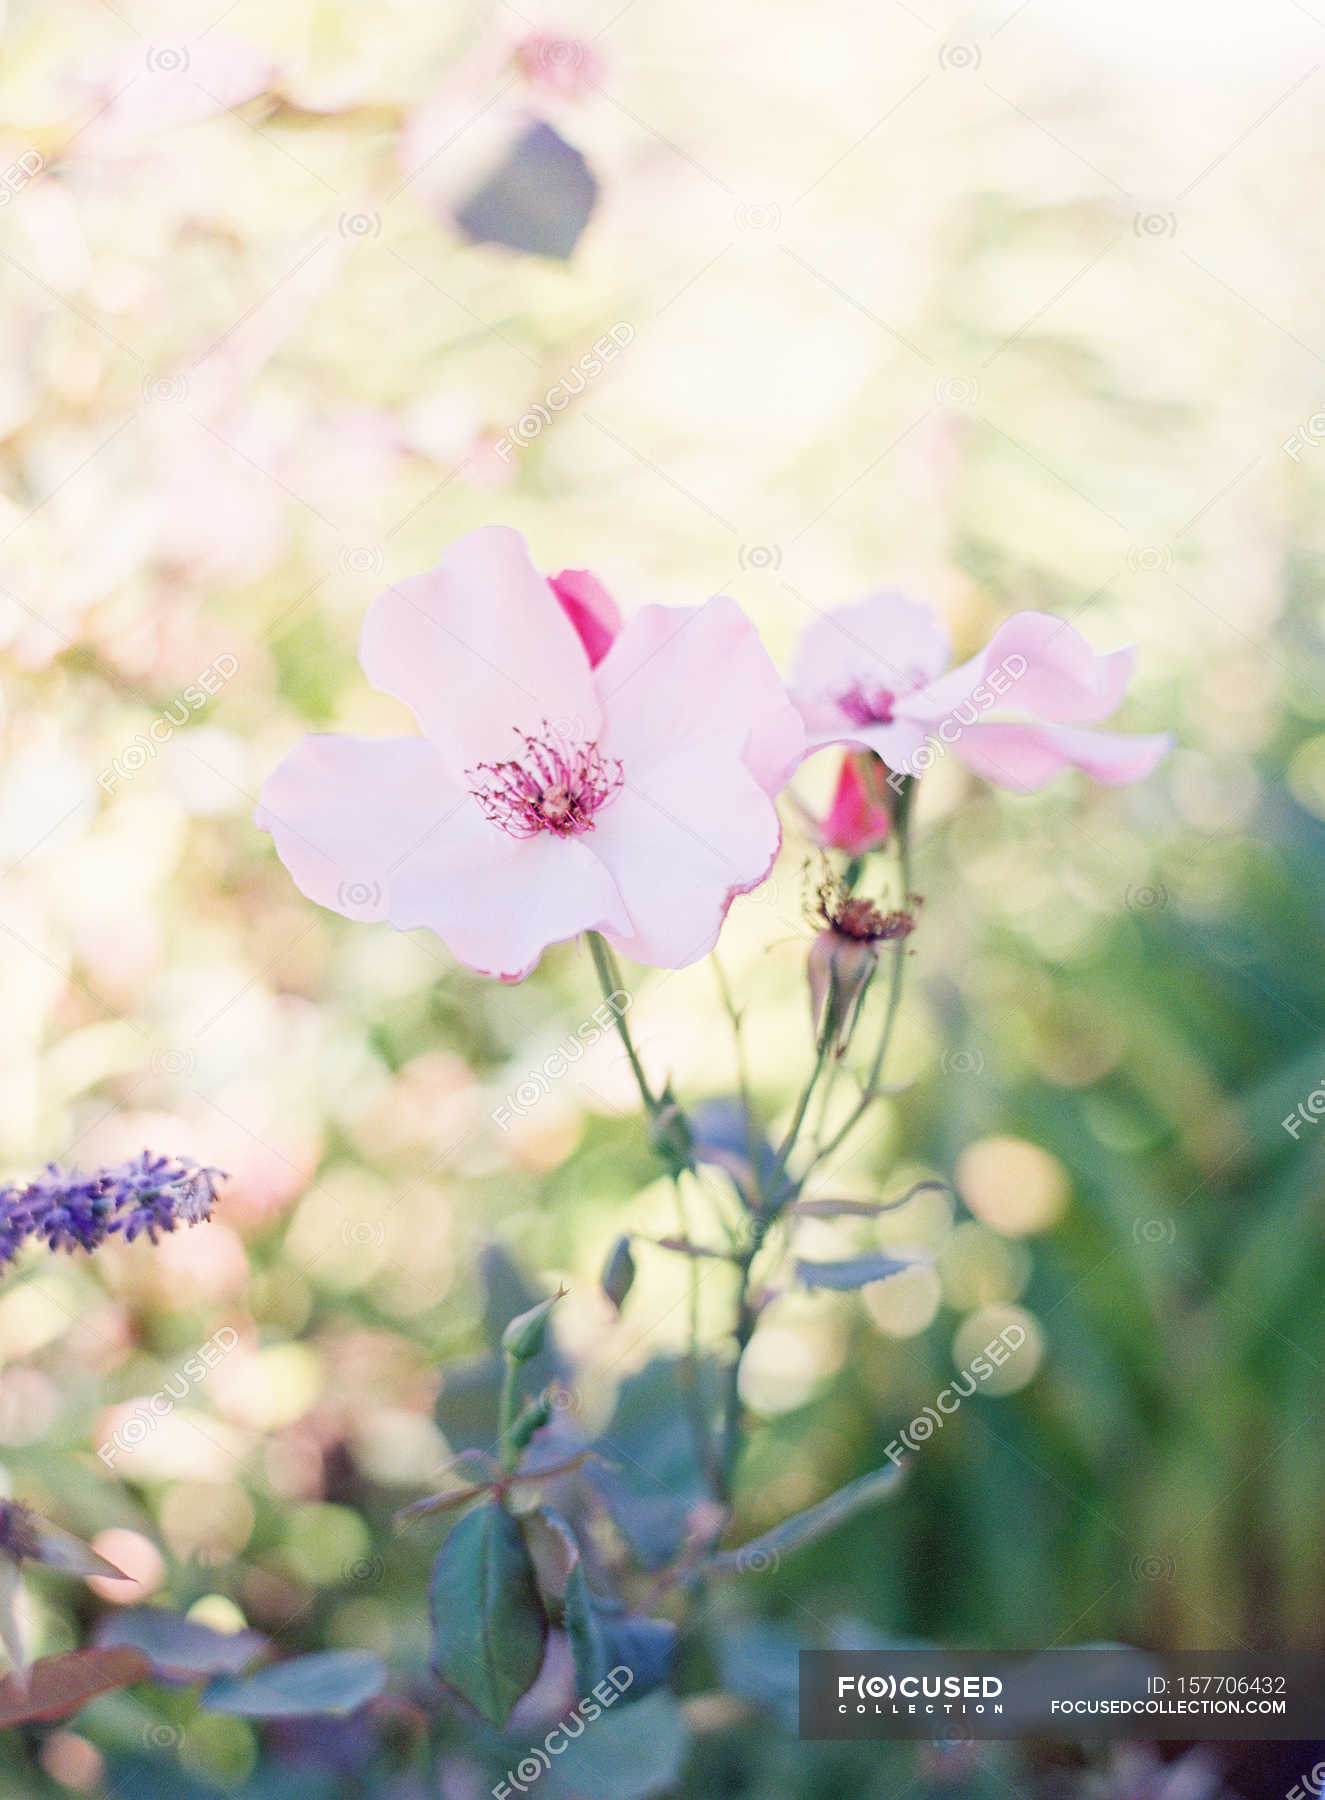 Rustic summer flowers — clean, details - Stock Photo | #157706432